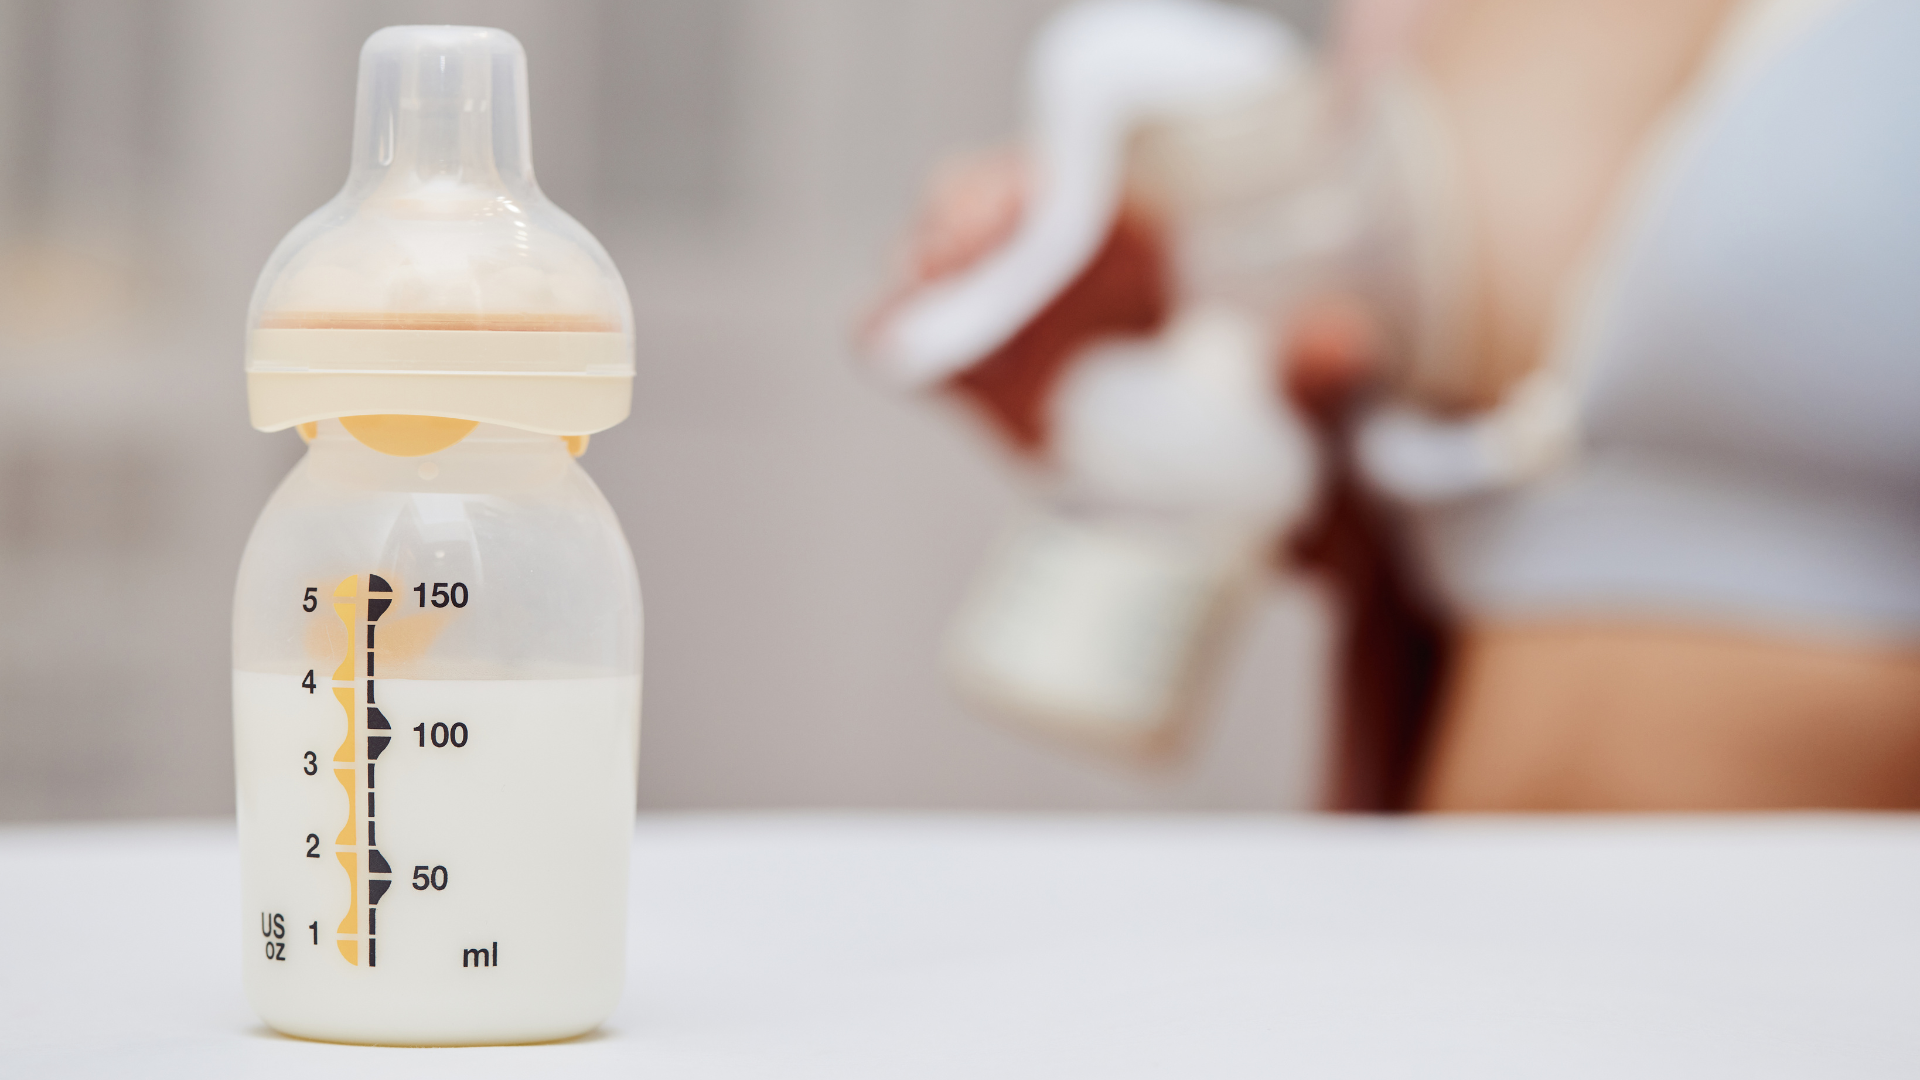 Medela baby bottle will breastmilk and mom pumping in the background